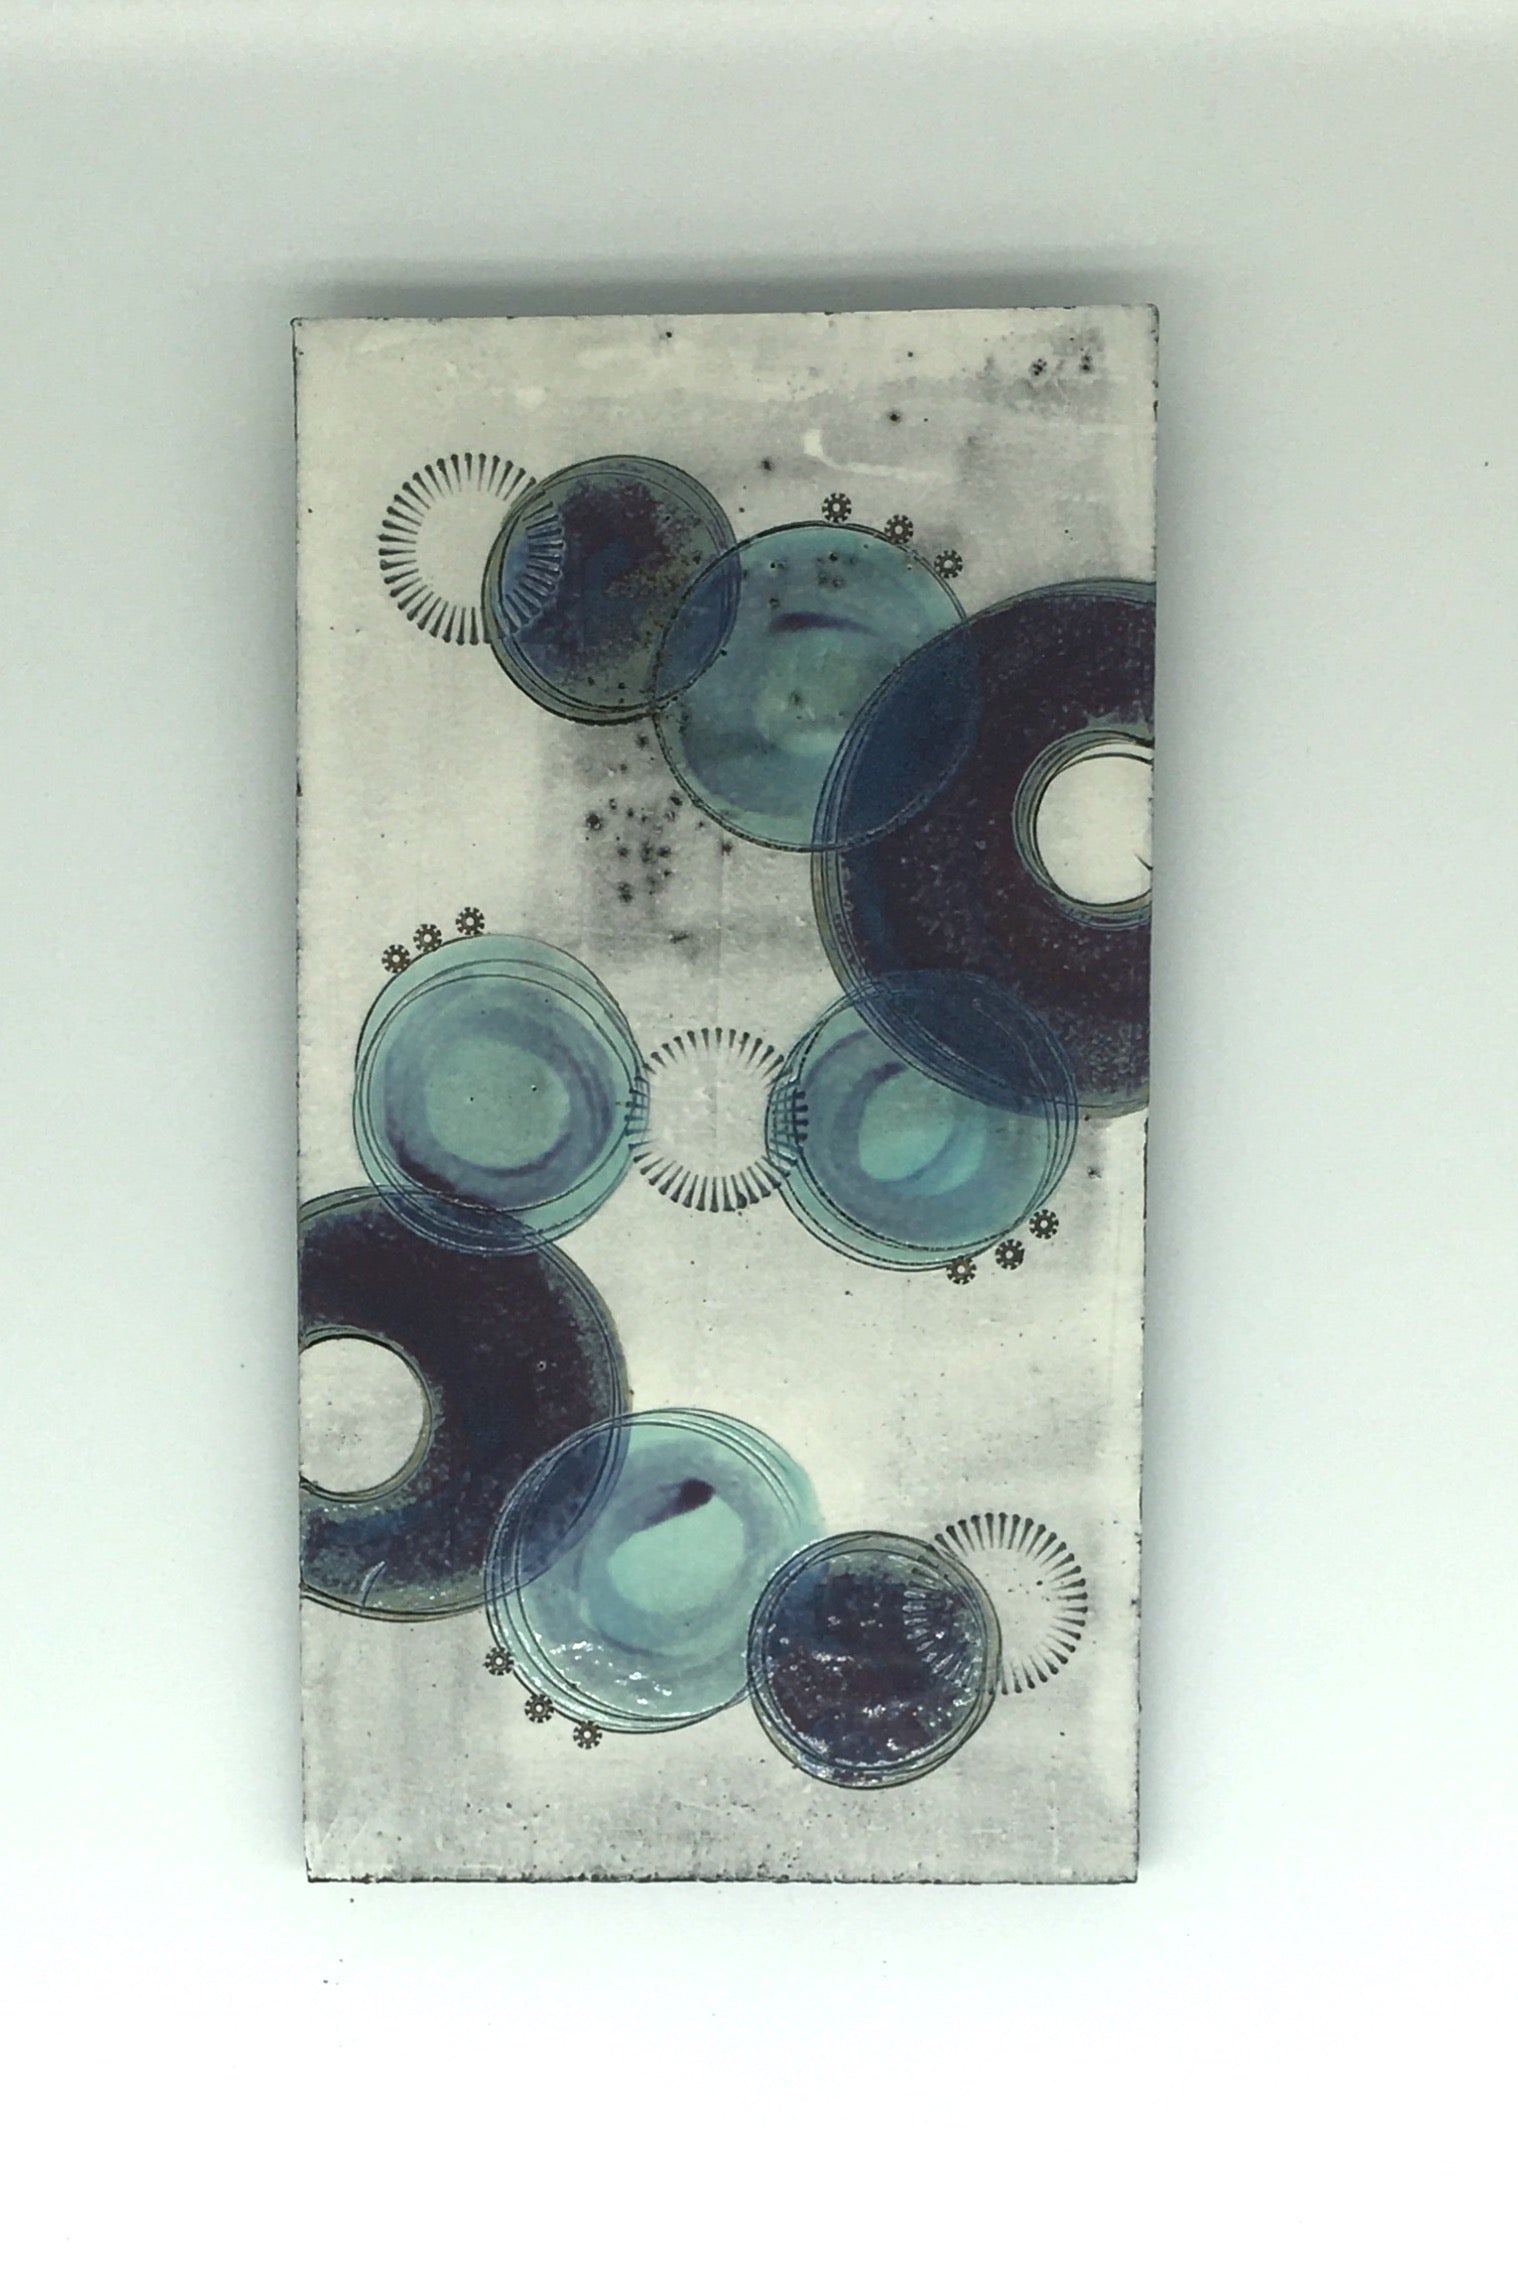 Medium wall plaque - with purple crescents and blue circles